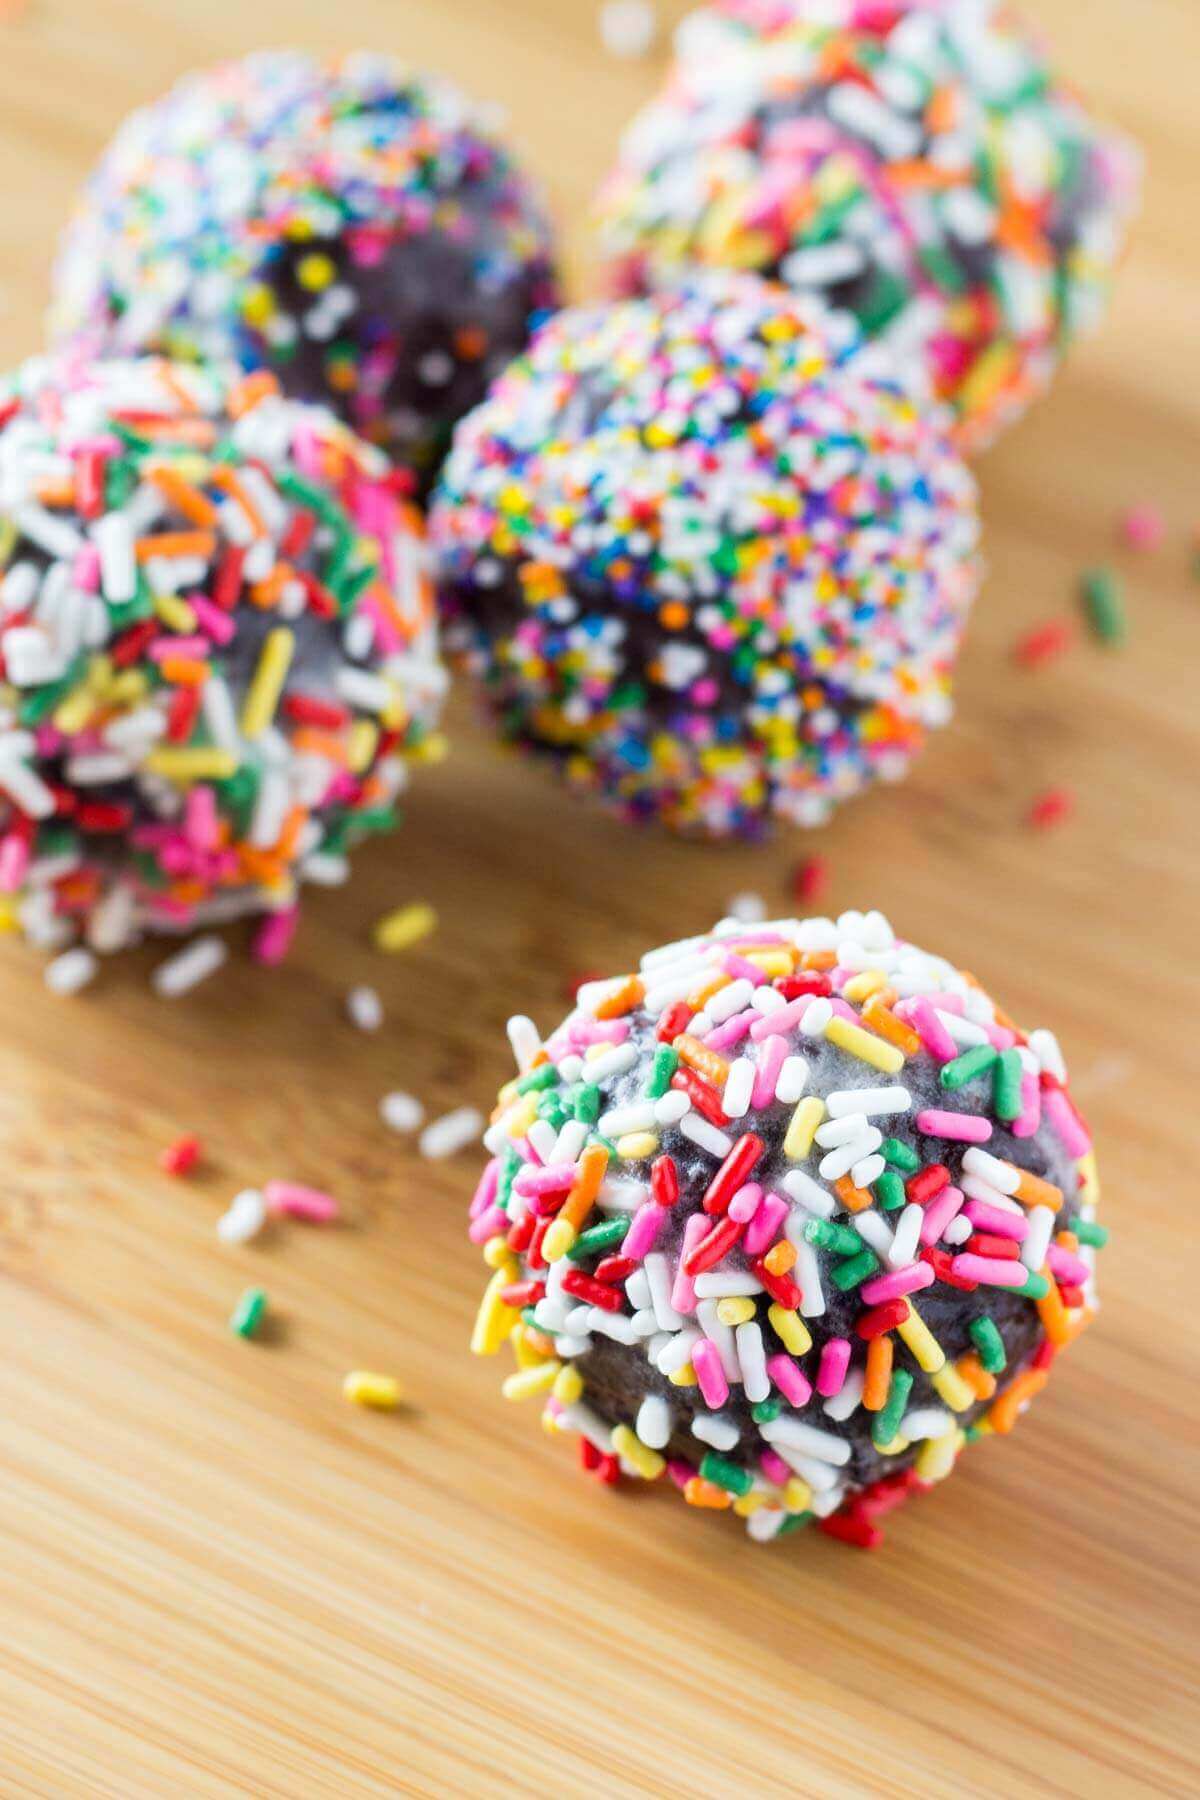 Perfectly fudgy Chocolate Doughnut Holes dipped in sweet vanilla glaze! Fluffy, oh so moist & so much better than the doughnut shop! www.justsotasty.com